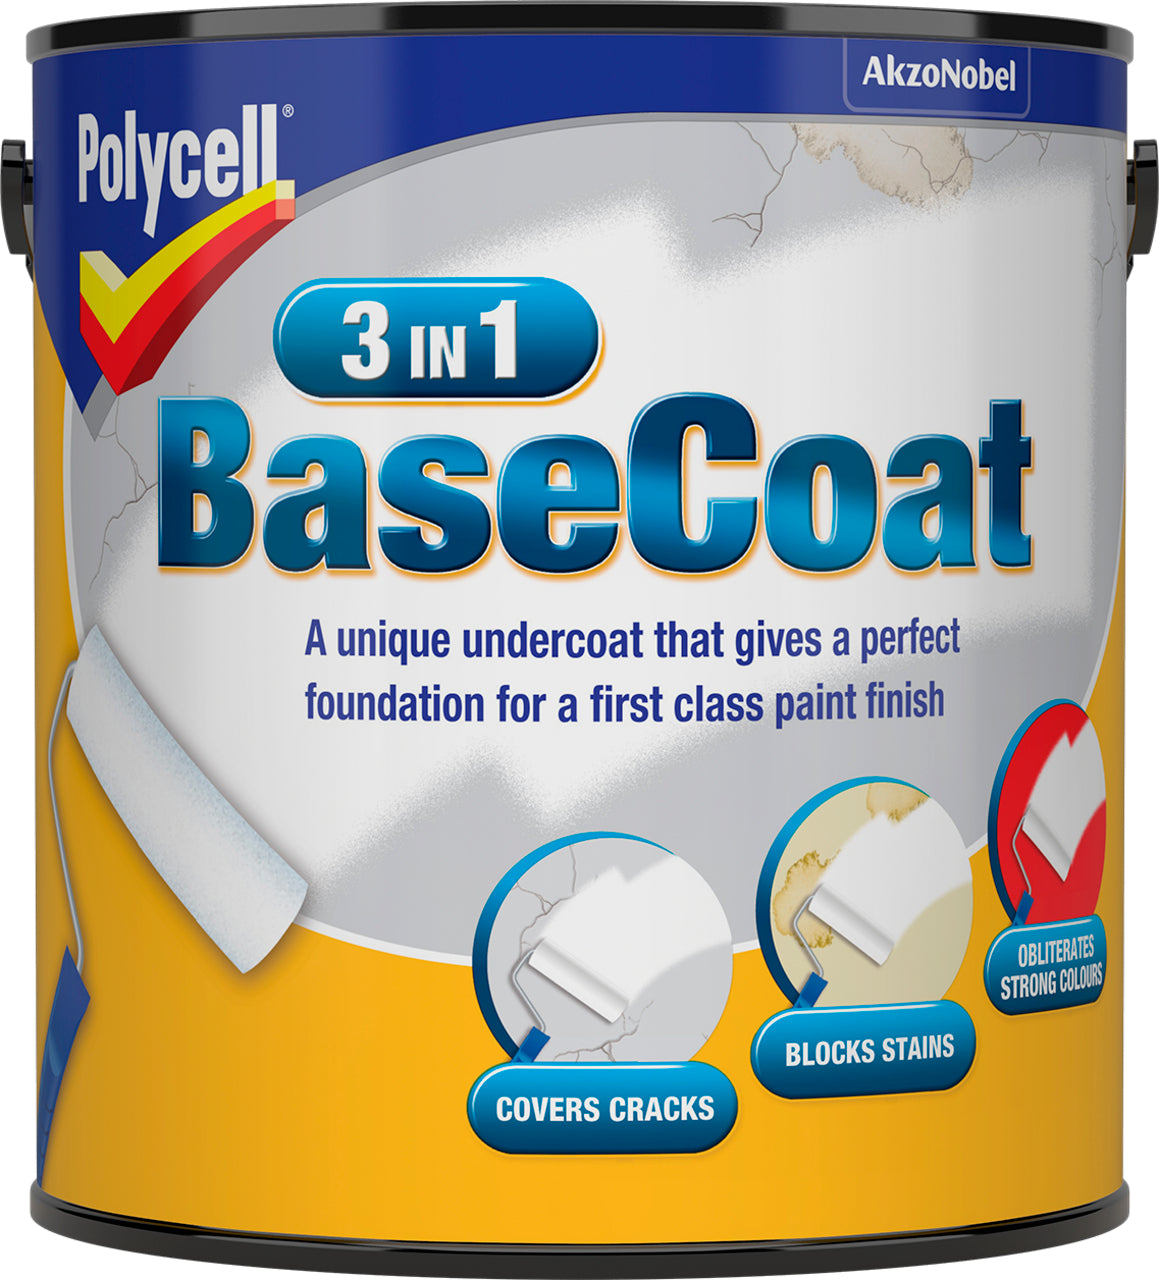 Polycell 3 in 1 Basecoat 2.5L